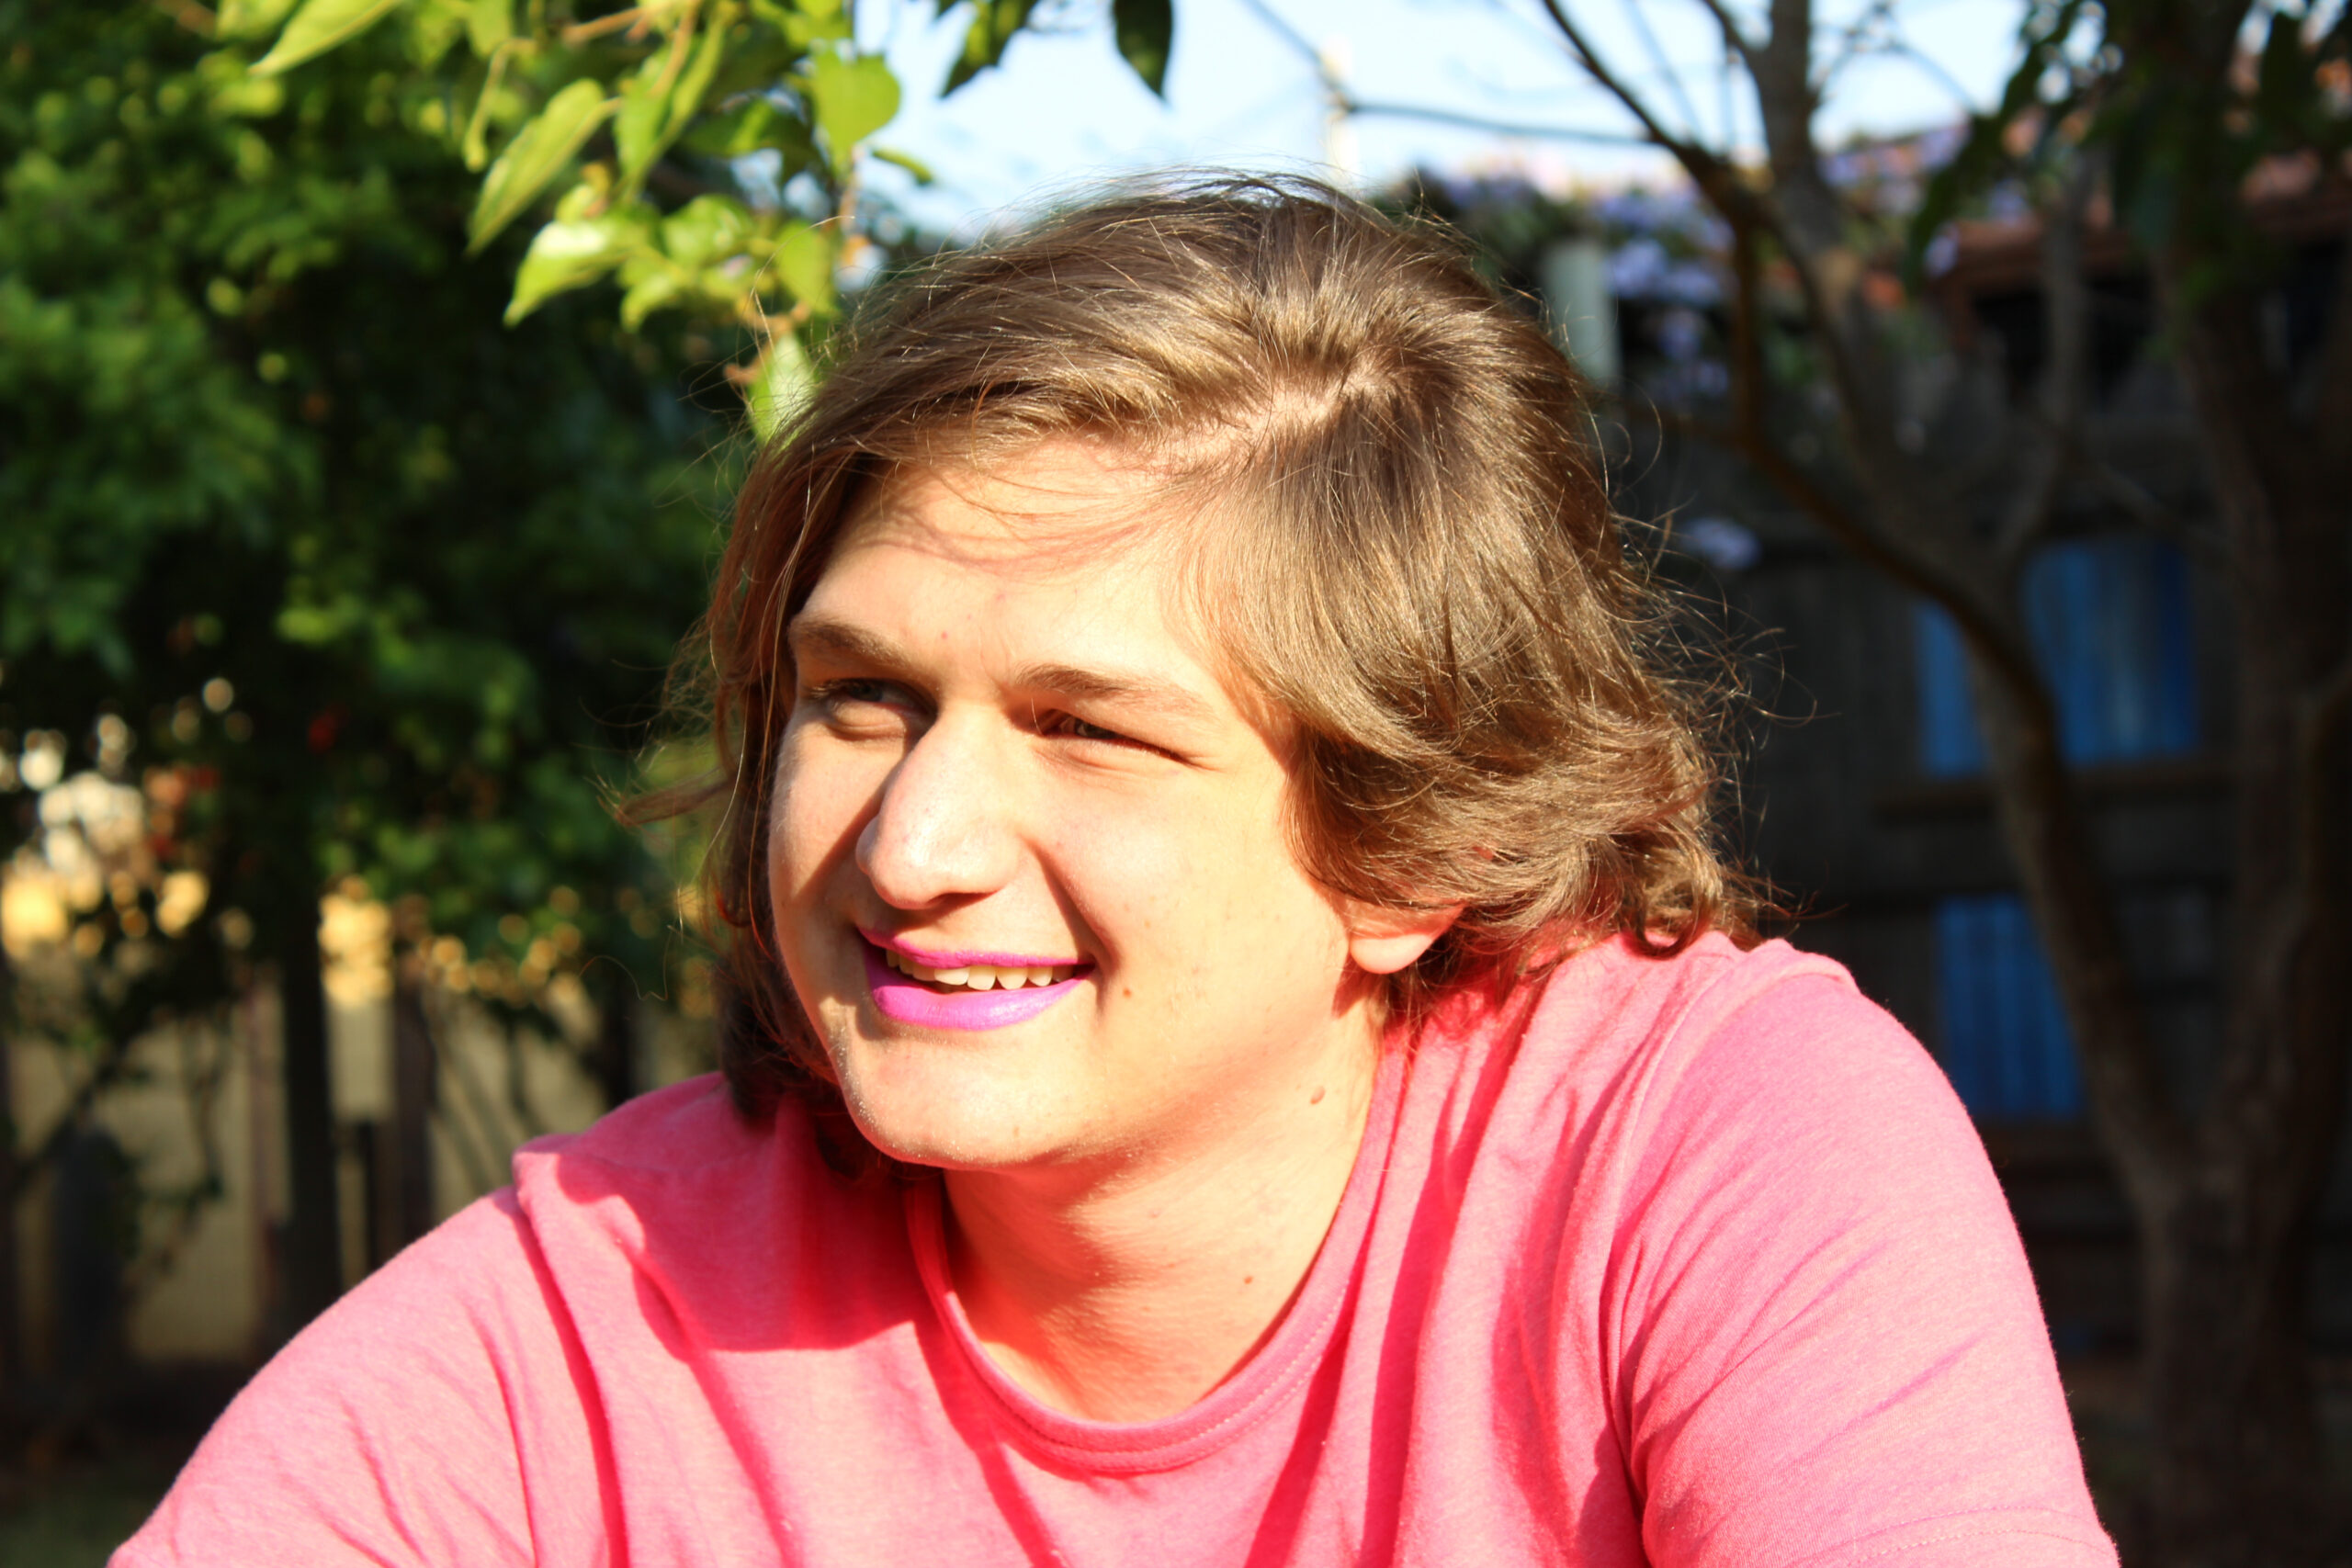 A young trans person, in a pink top and pink lipstick,sitting outside smiling, looking away from the camera.